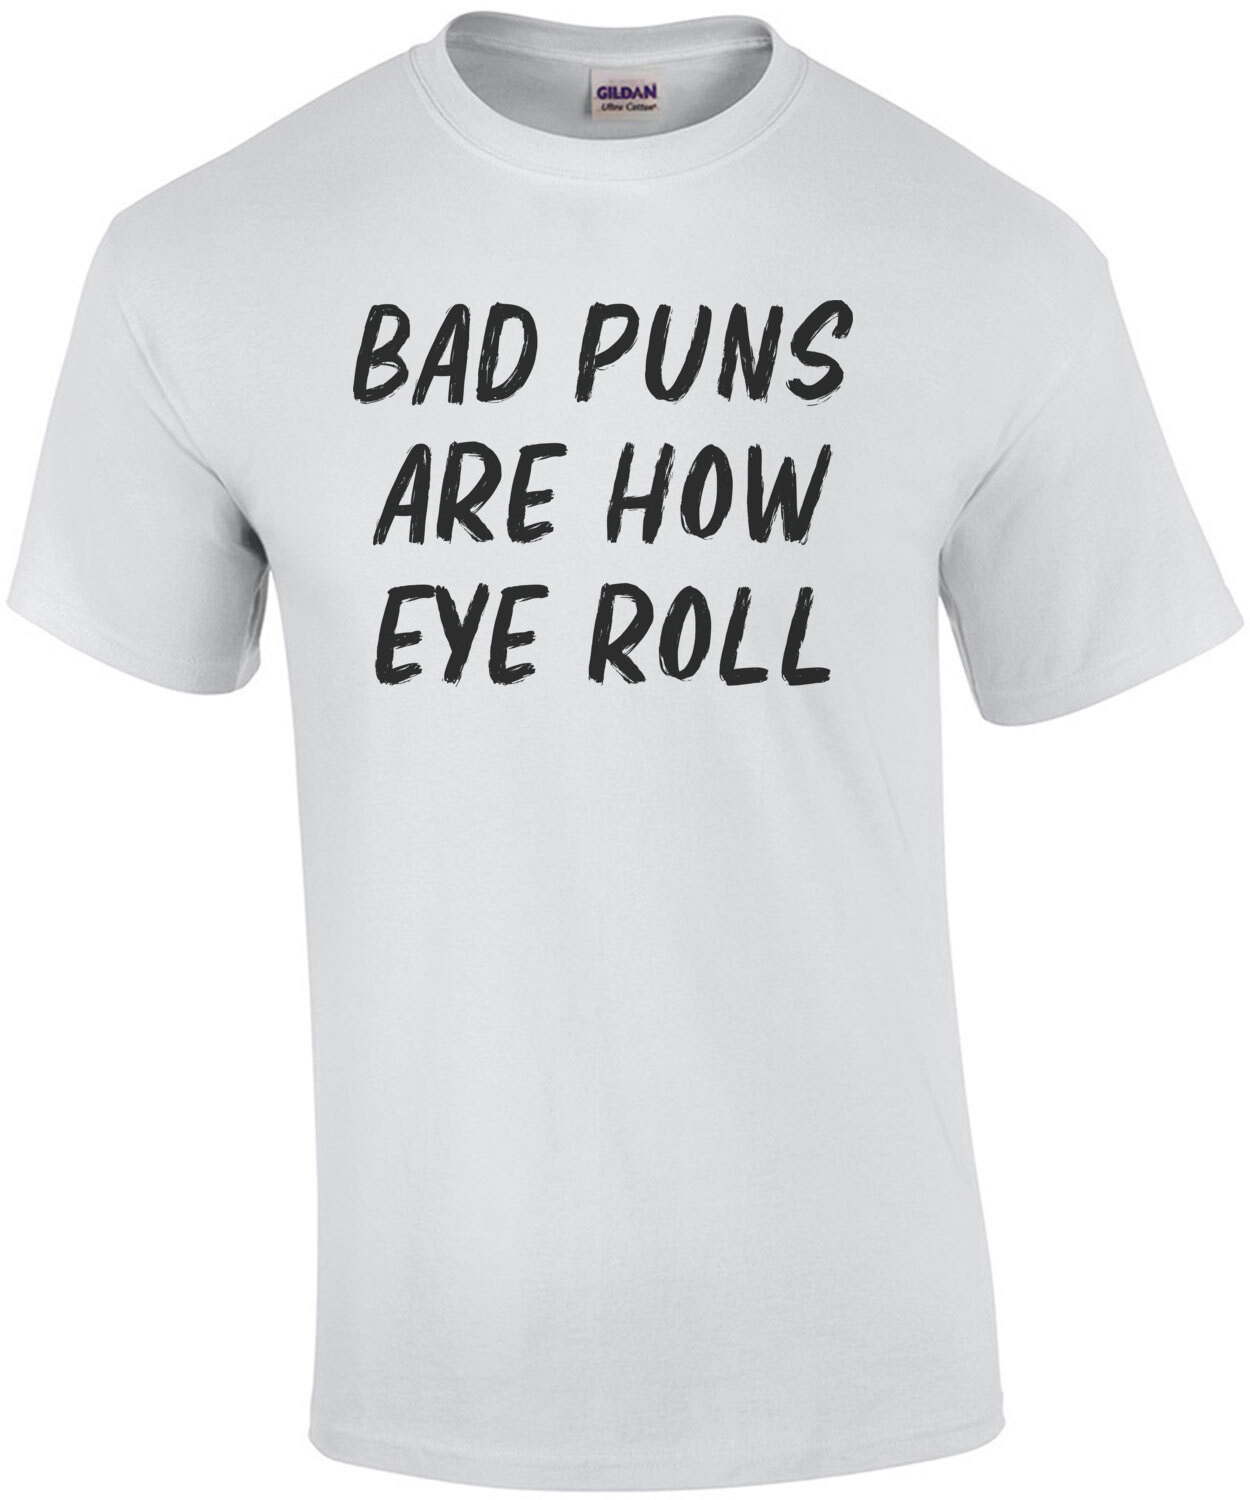 Bad puns are how eye roll - funny pun t-shirt